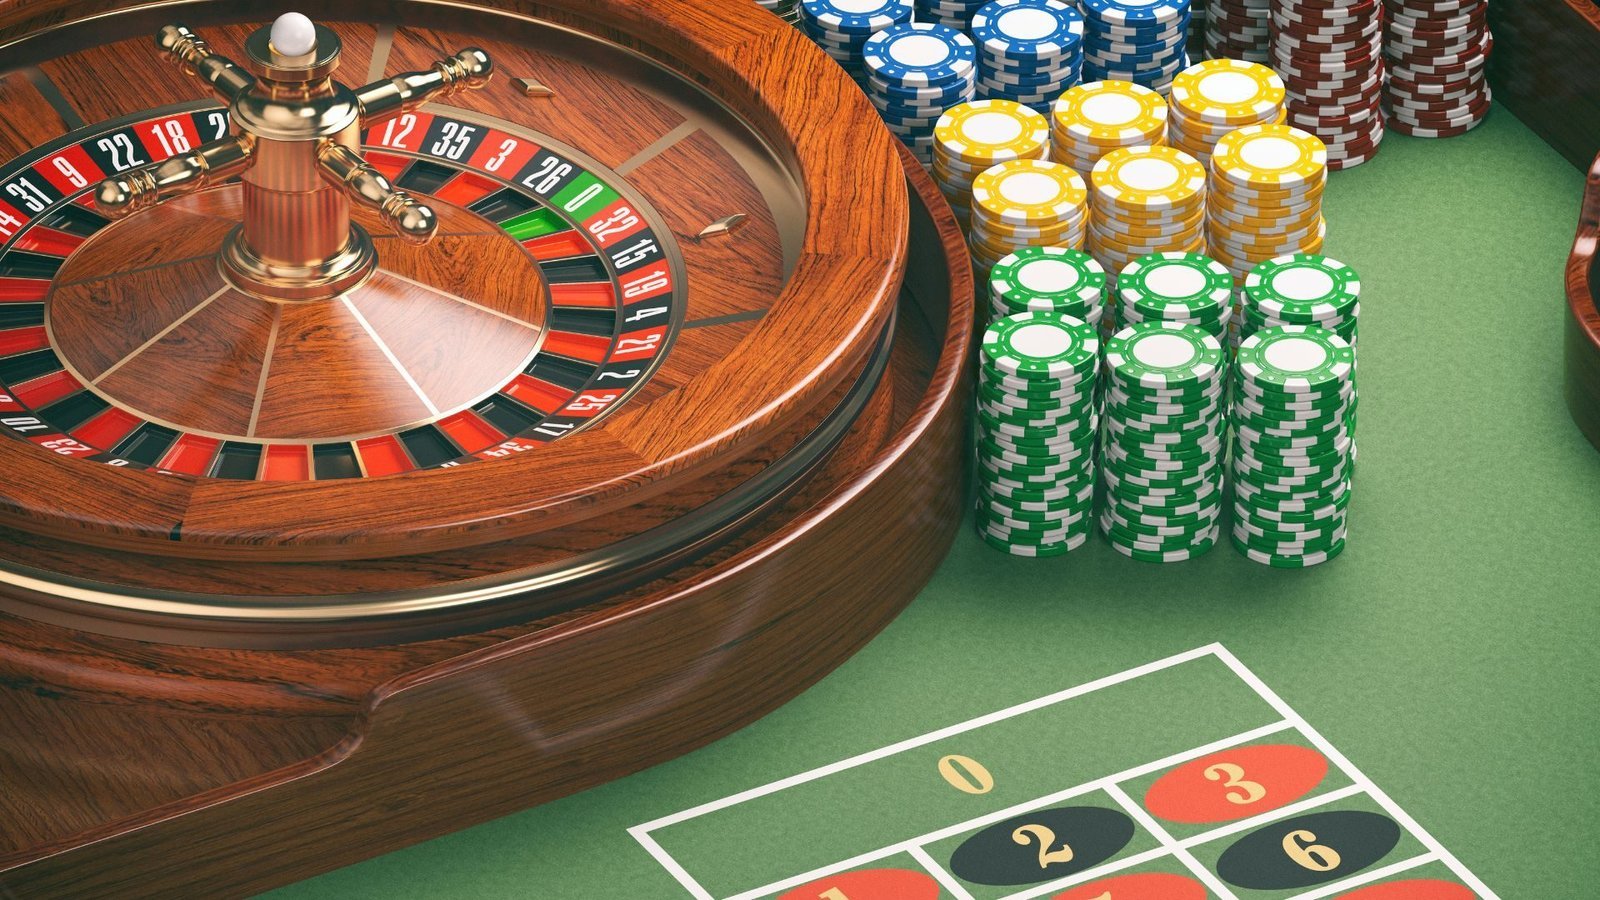 online-roulette-martingale-strategy-win-at-roulette-casino-games-james-bond-roulette-strategy-best-roulette-strategy-martingale-betting-strategy-play-roulette-playing-roulette-roulette-wheel-fibonacci-roulette-strategy-losing-bet-playing-roulette-online